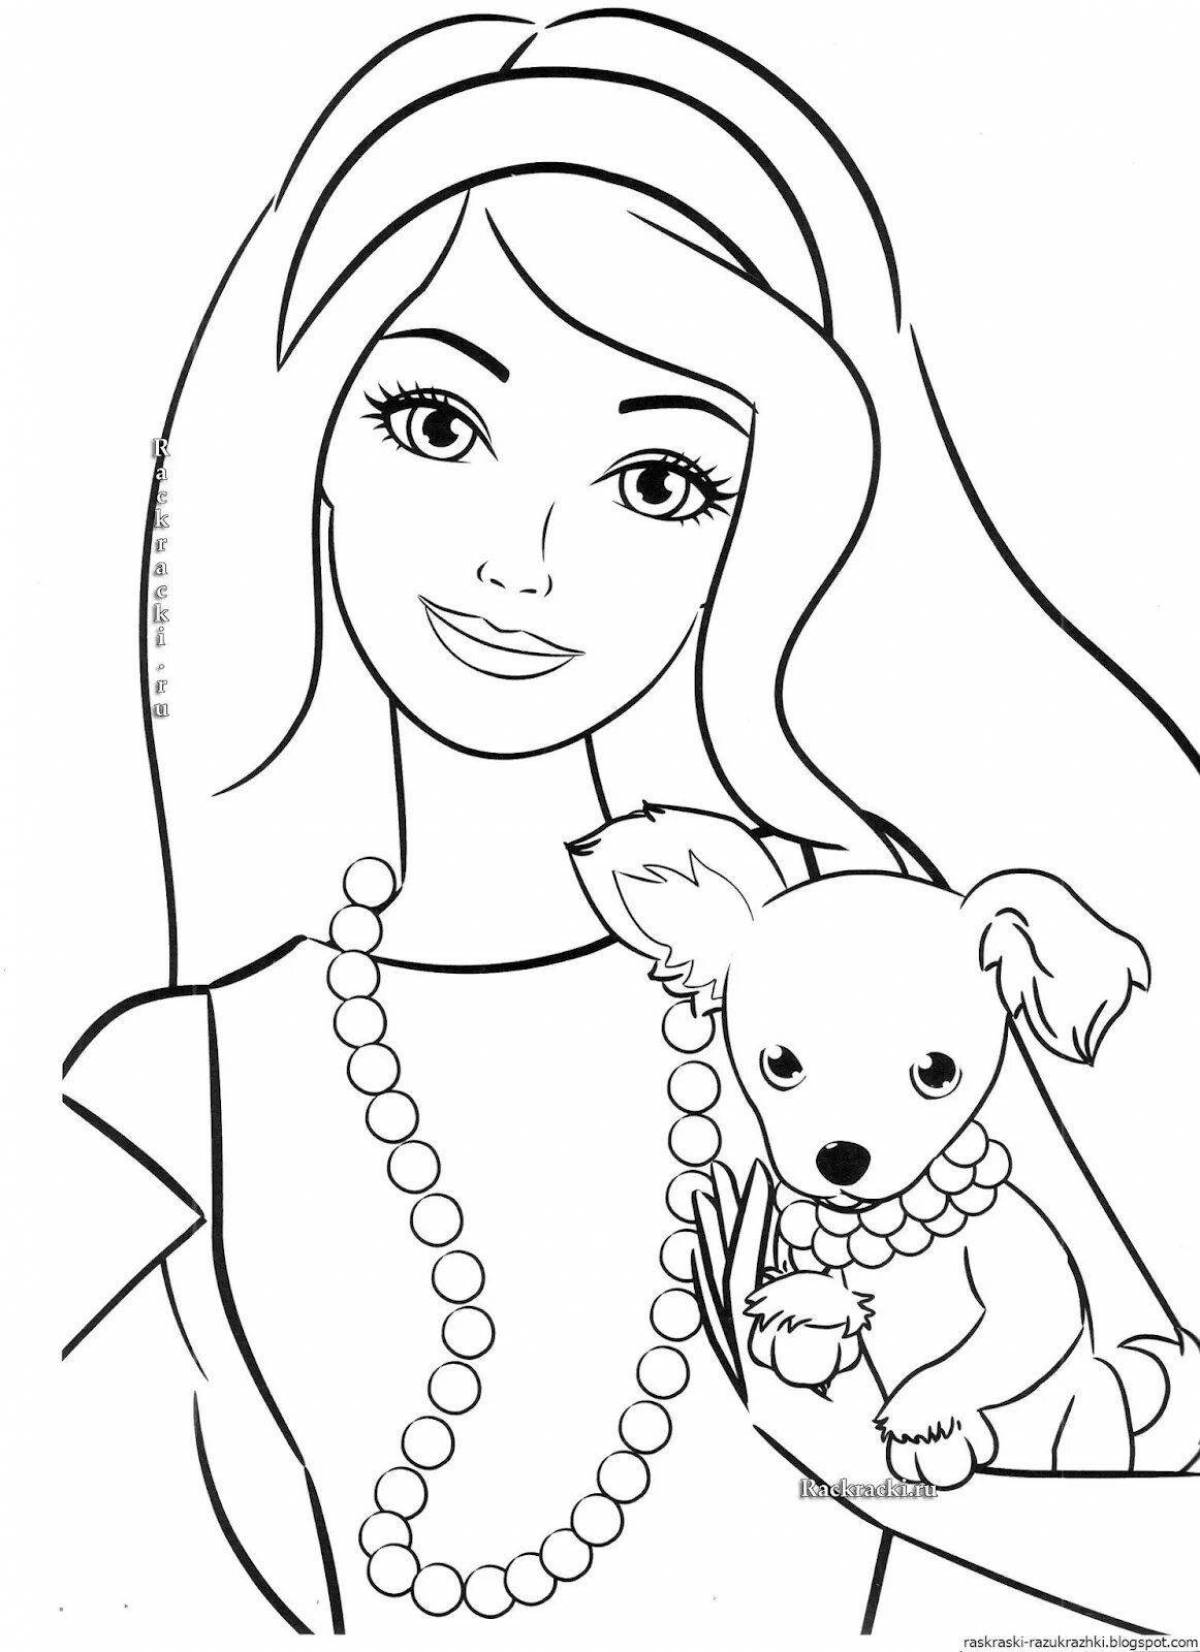 Unique coloring book for girls 6-7 years old